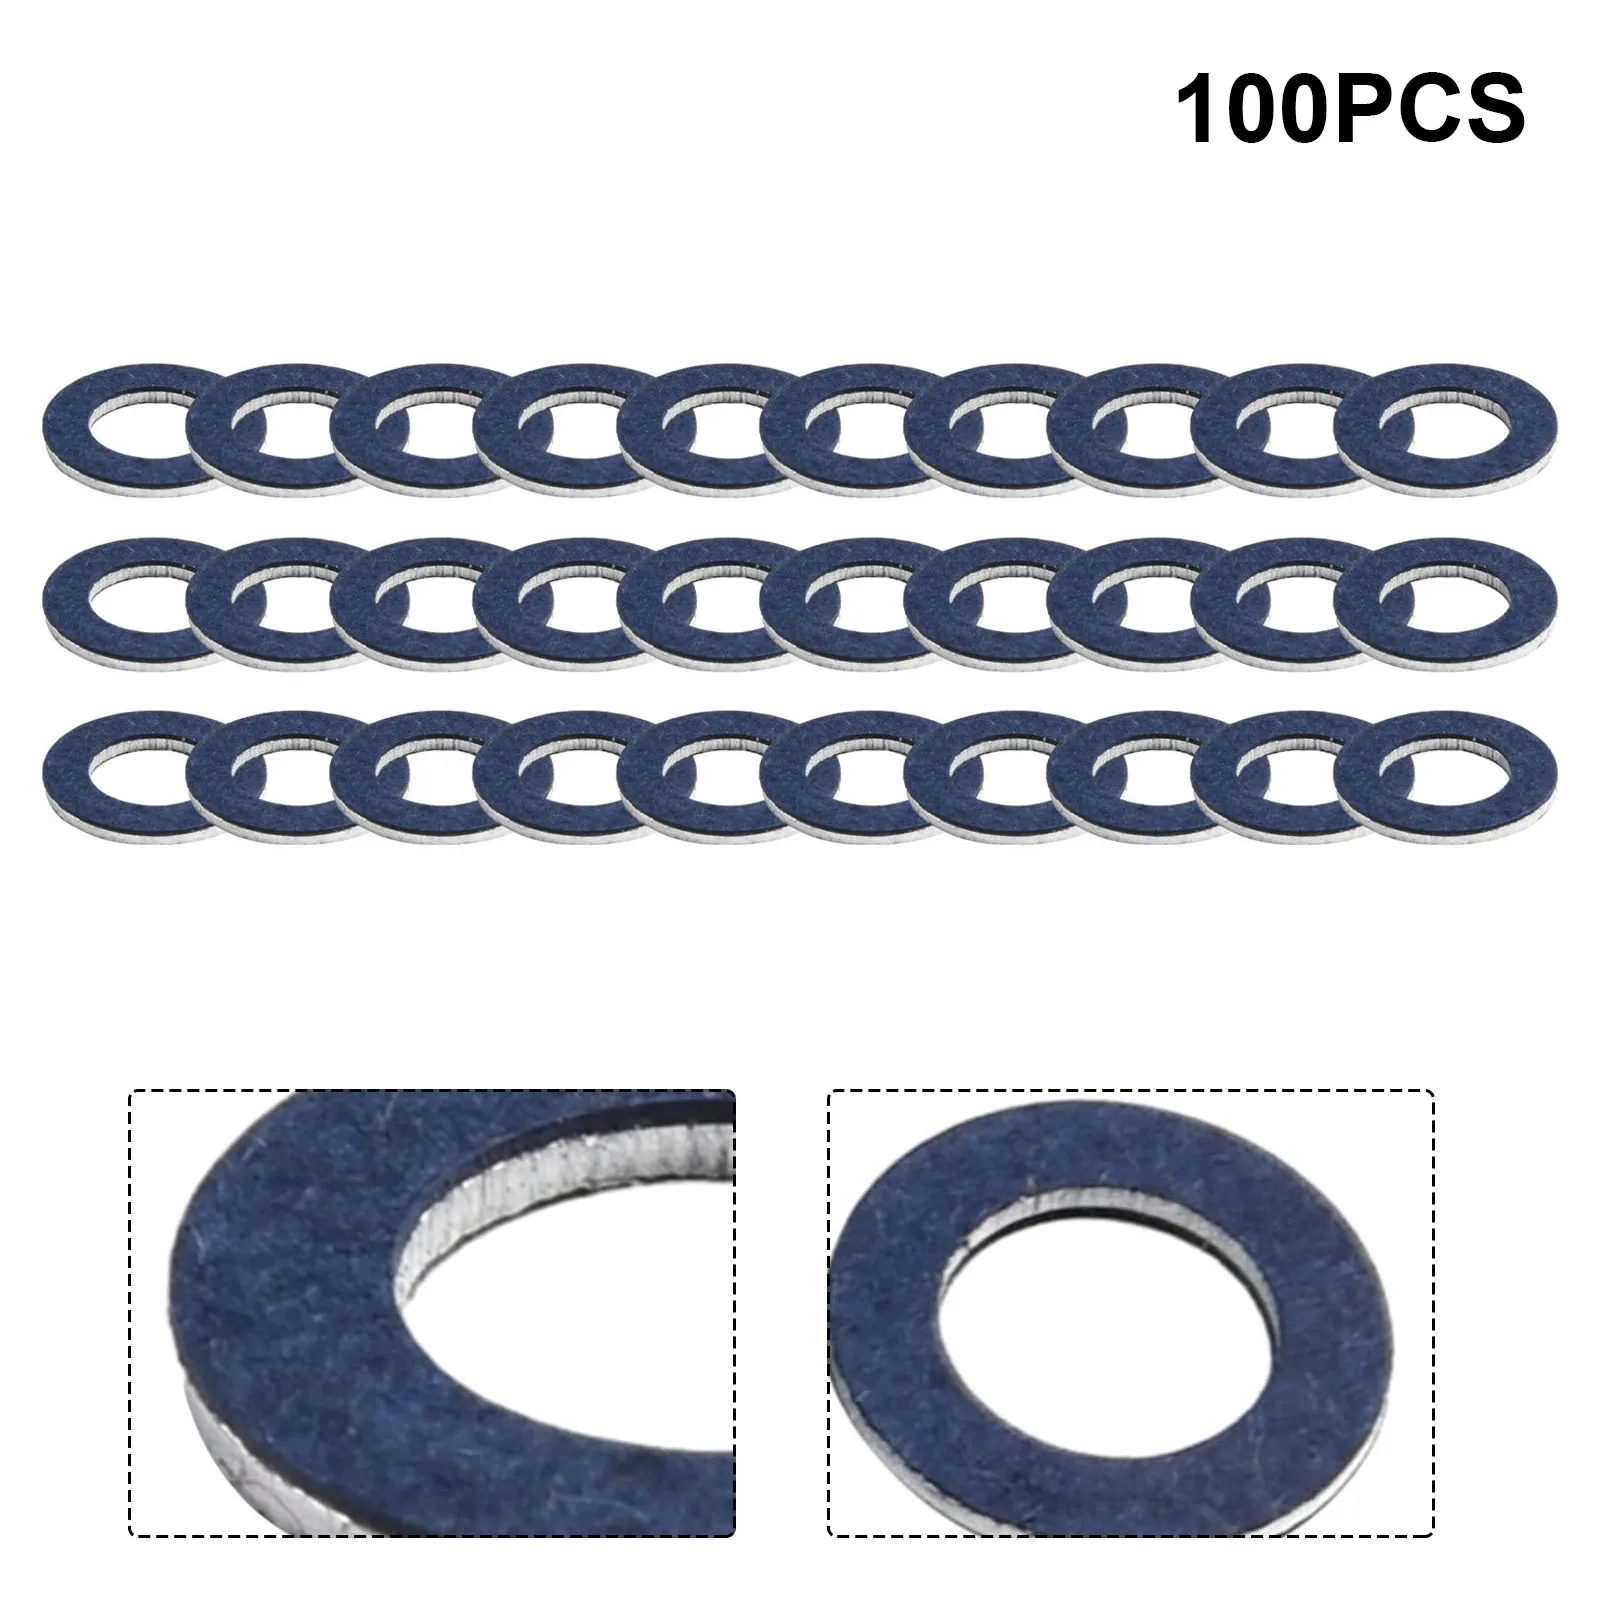 New Replacement Durable Easy Use High Quality Practical Washer Gasket Parts Set Of 100 Washers 100pcs For Toyota